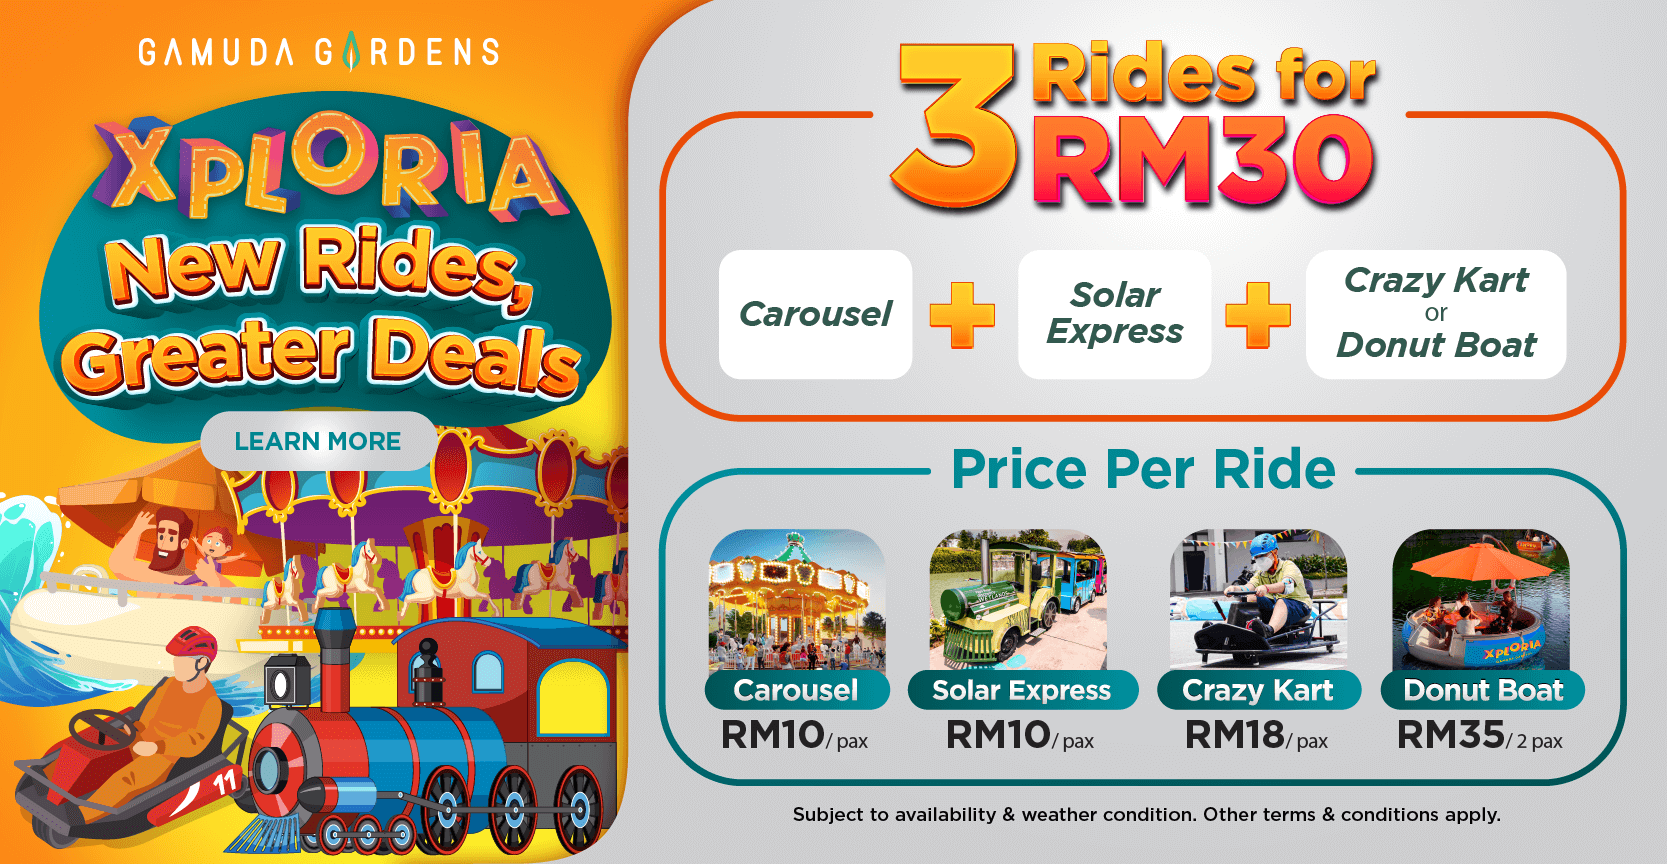 New Rides, Greater Deals!